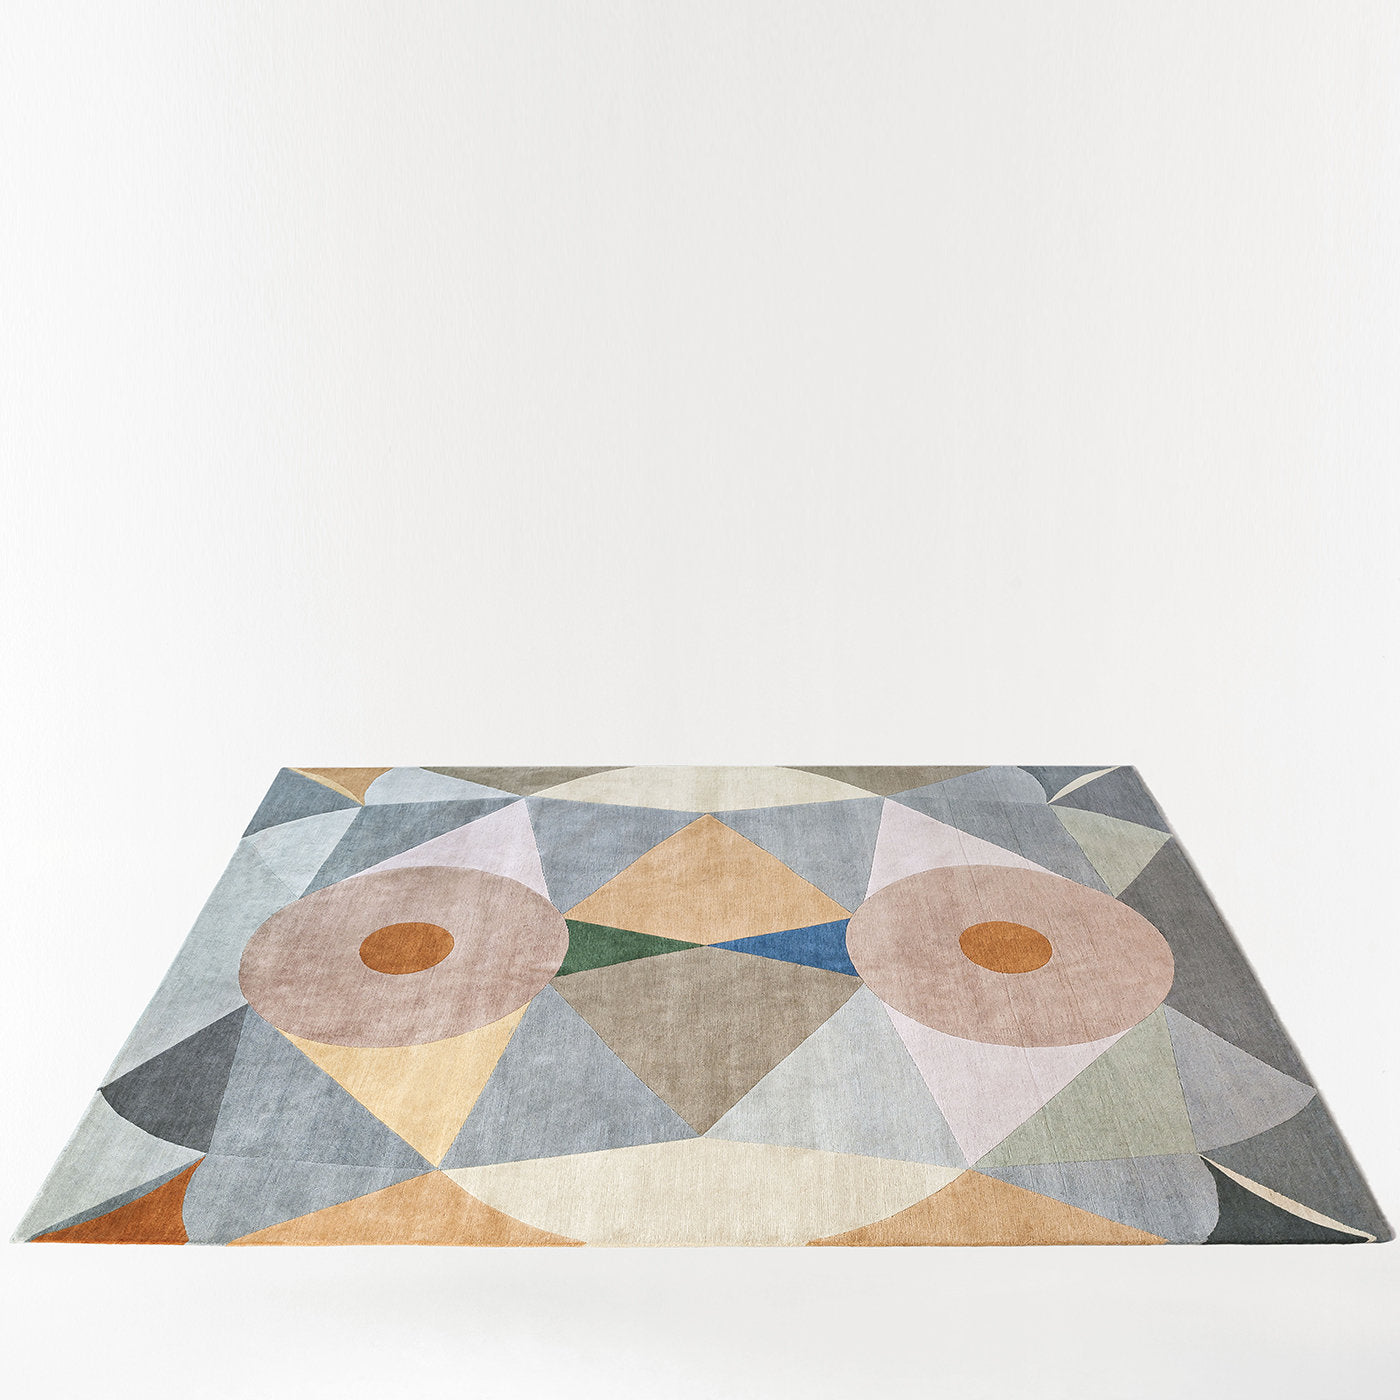 Rituale Rug by Riva - Alternative view 3